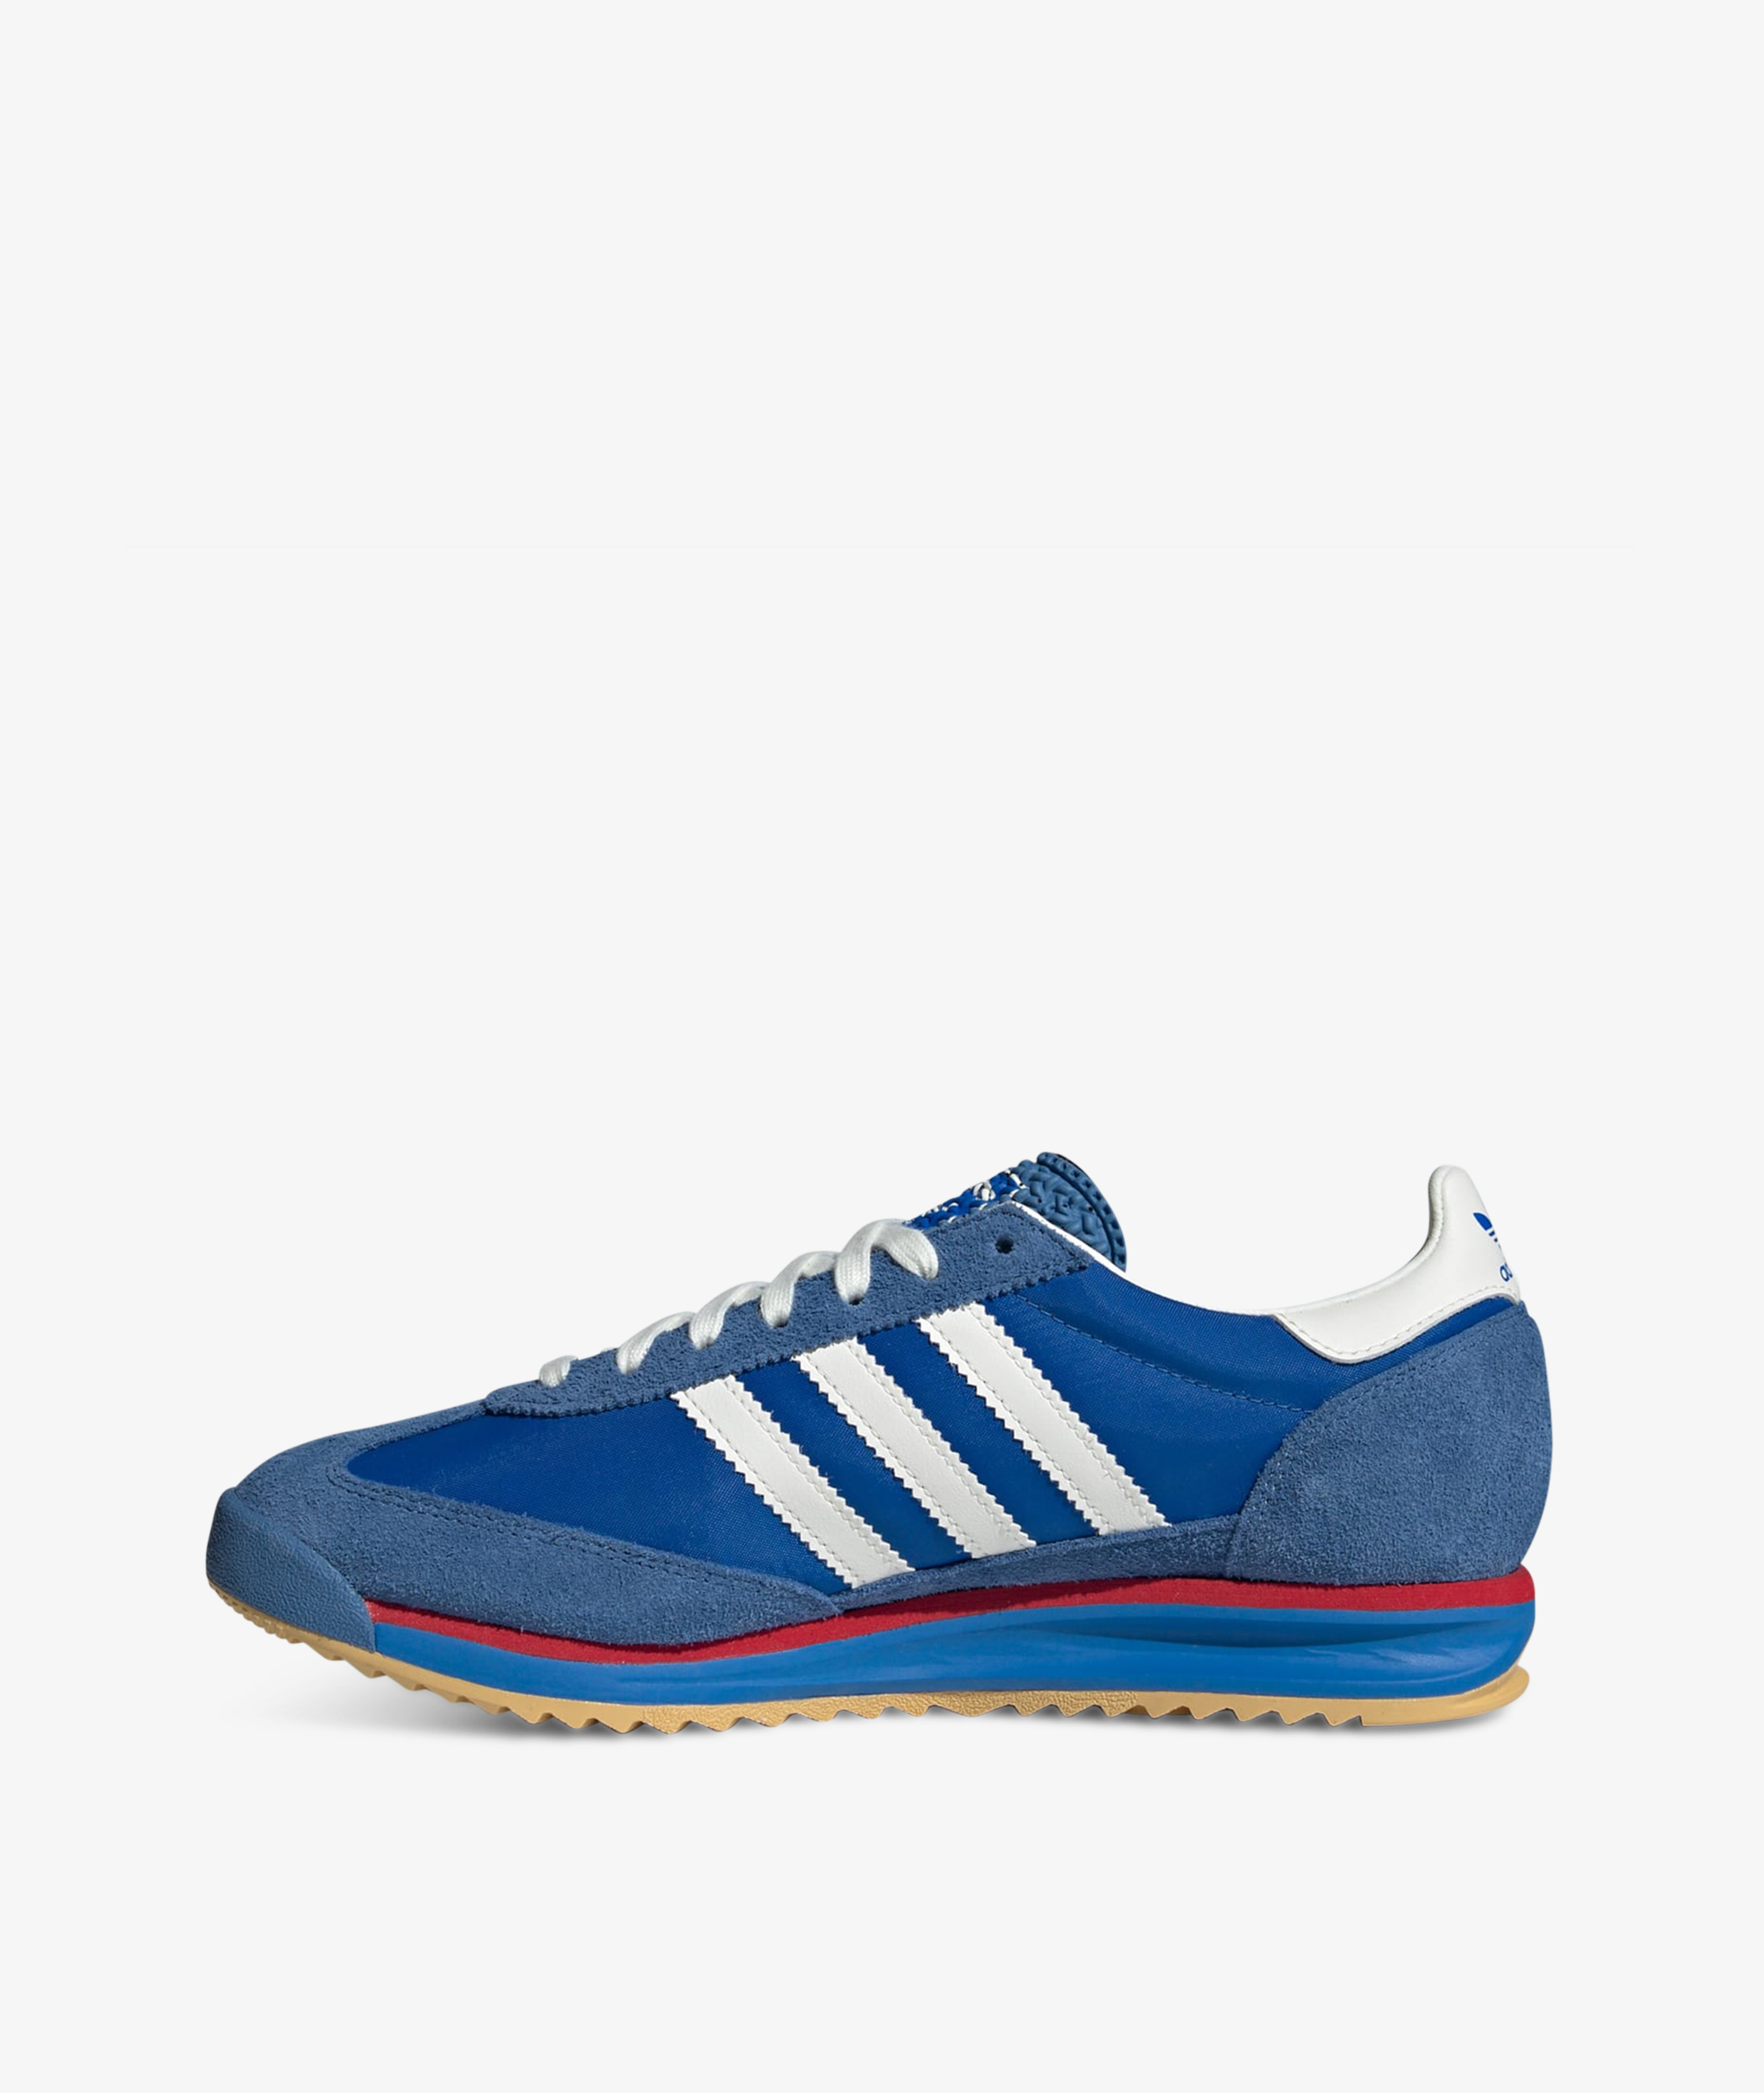 Norse Store | Shipping Worldwide - adidas Originals SL 72 RS - BLUE/CWHITE/